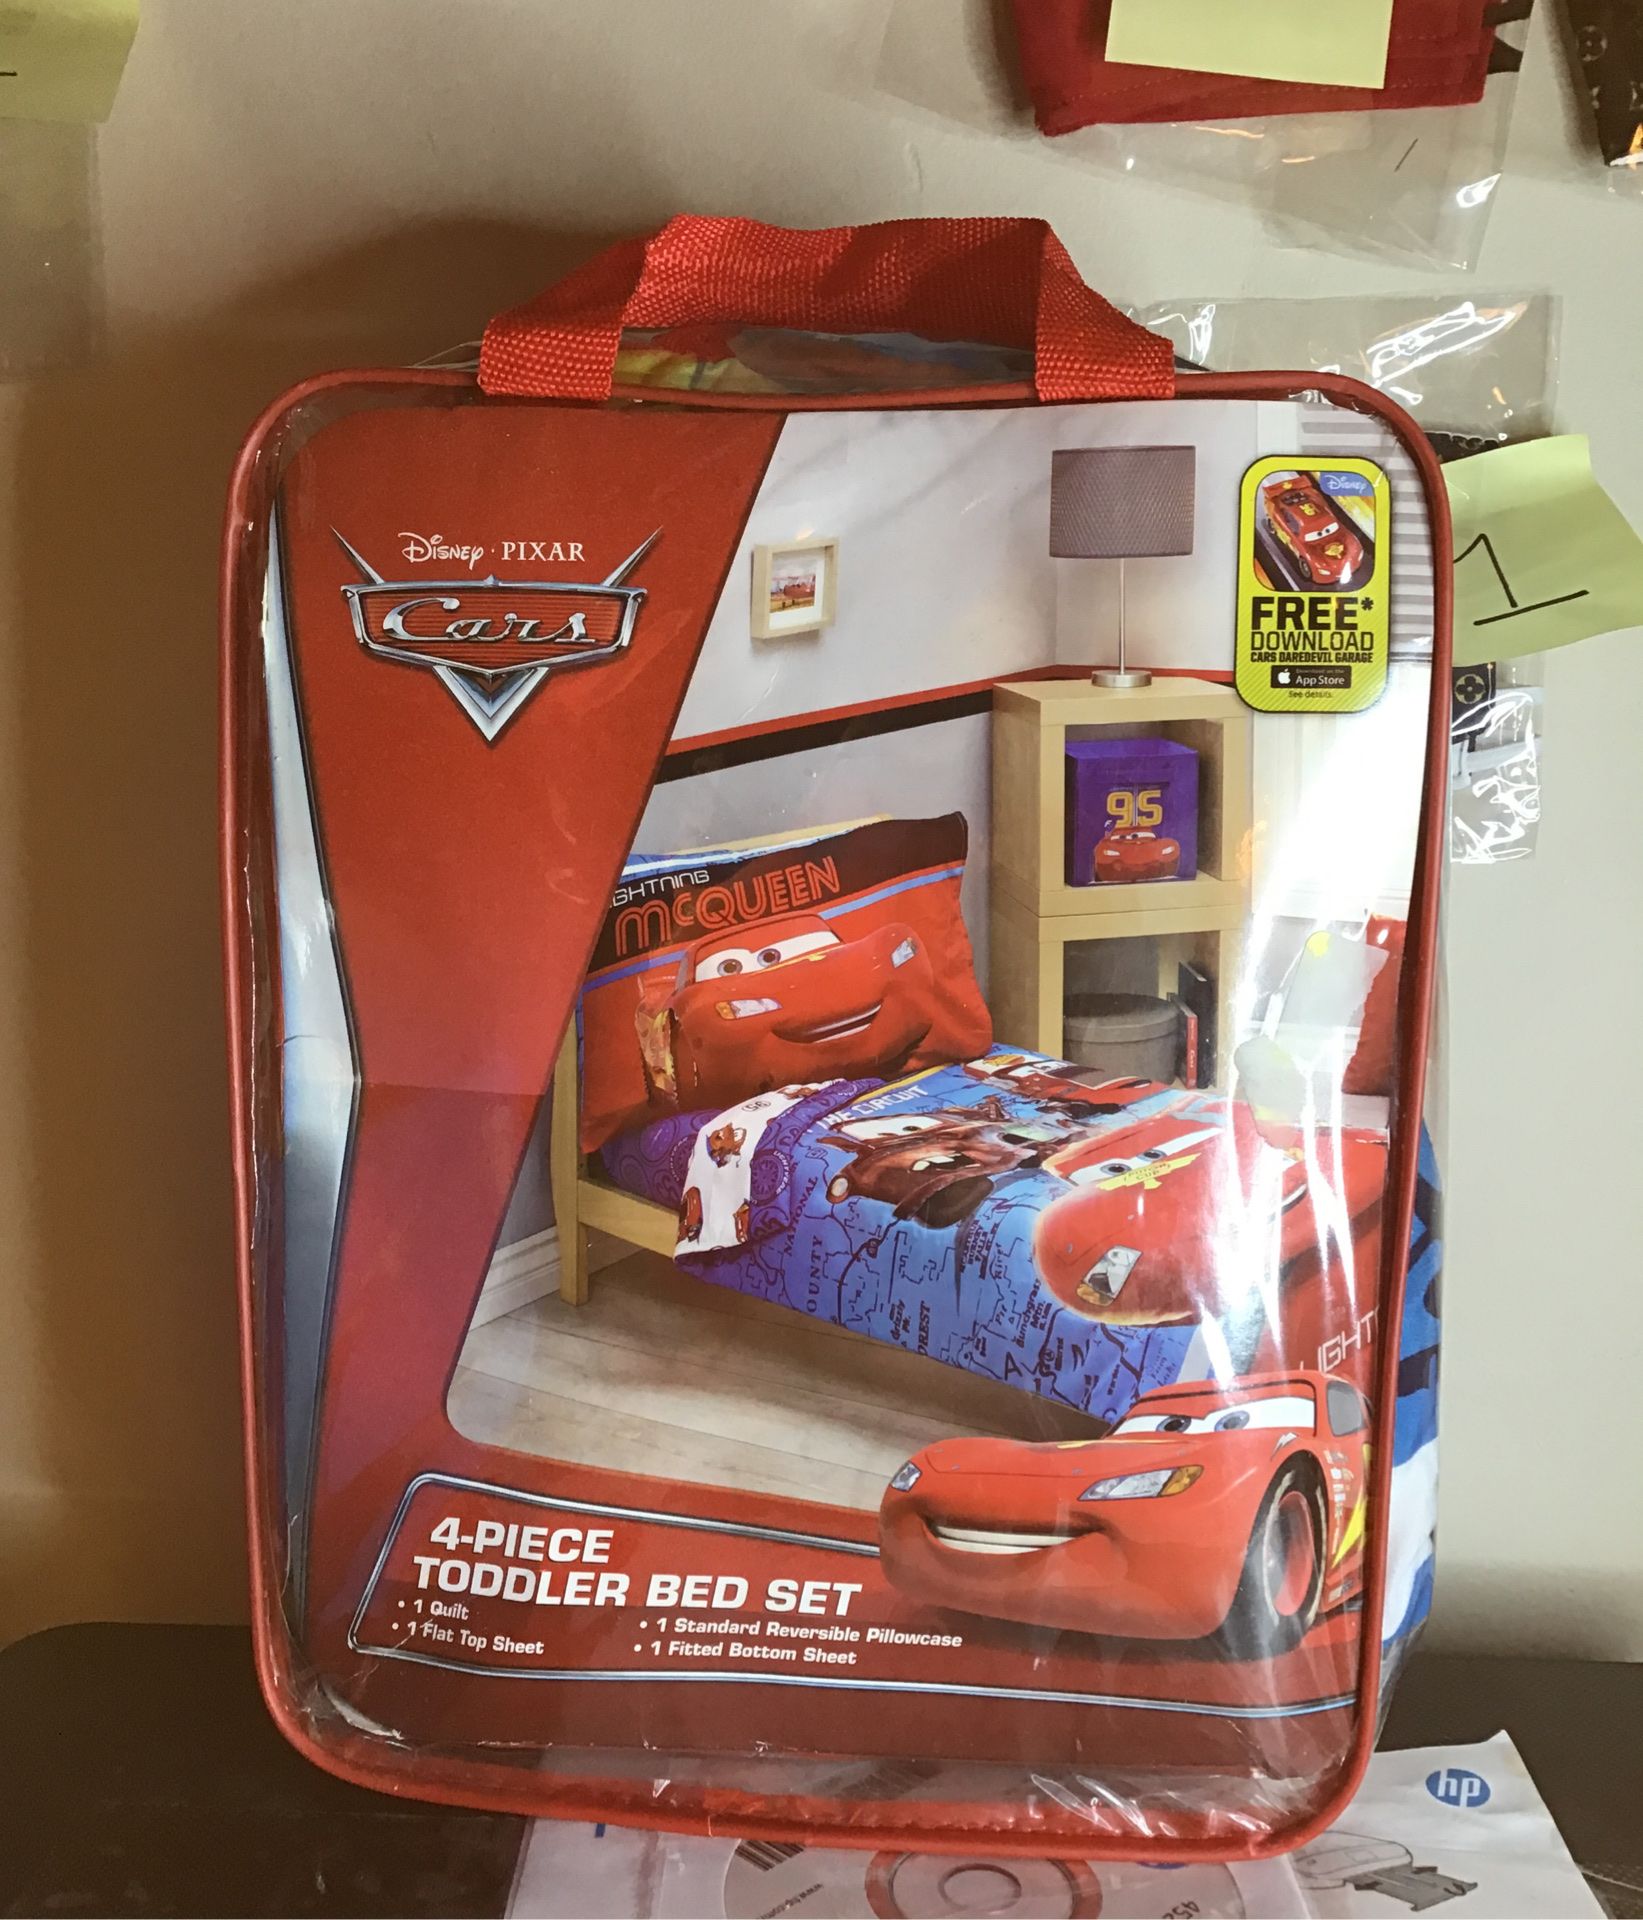 Toddler bed comforter only